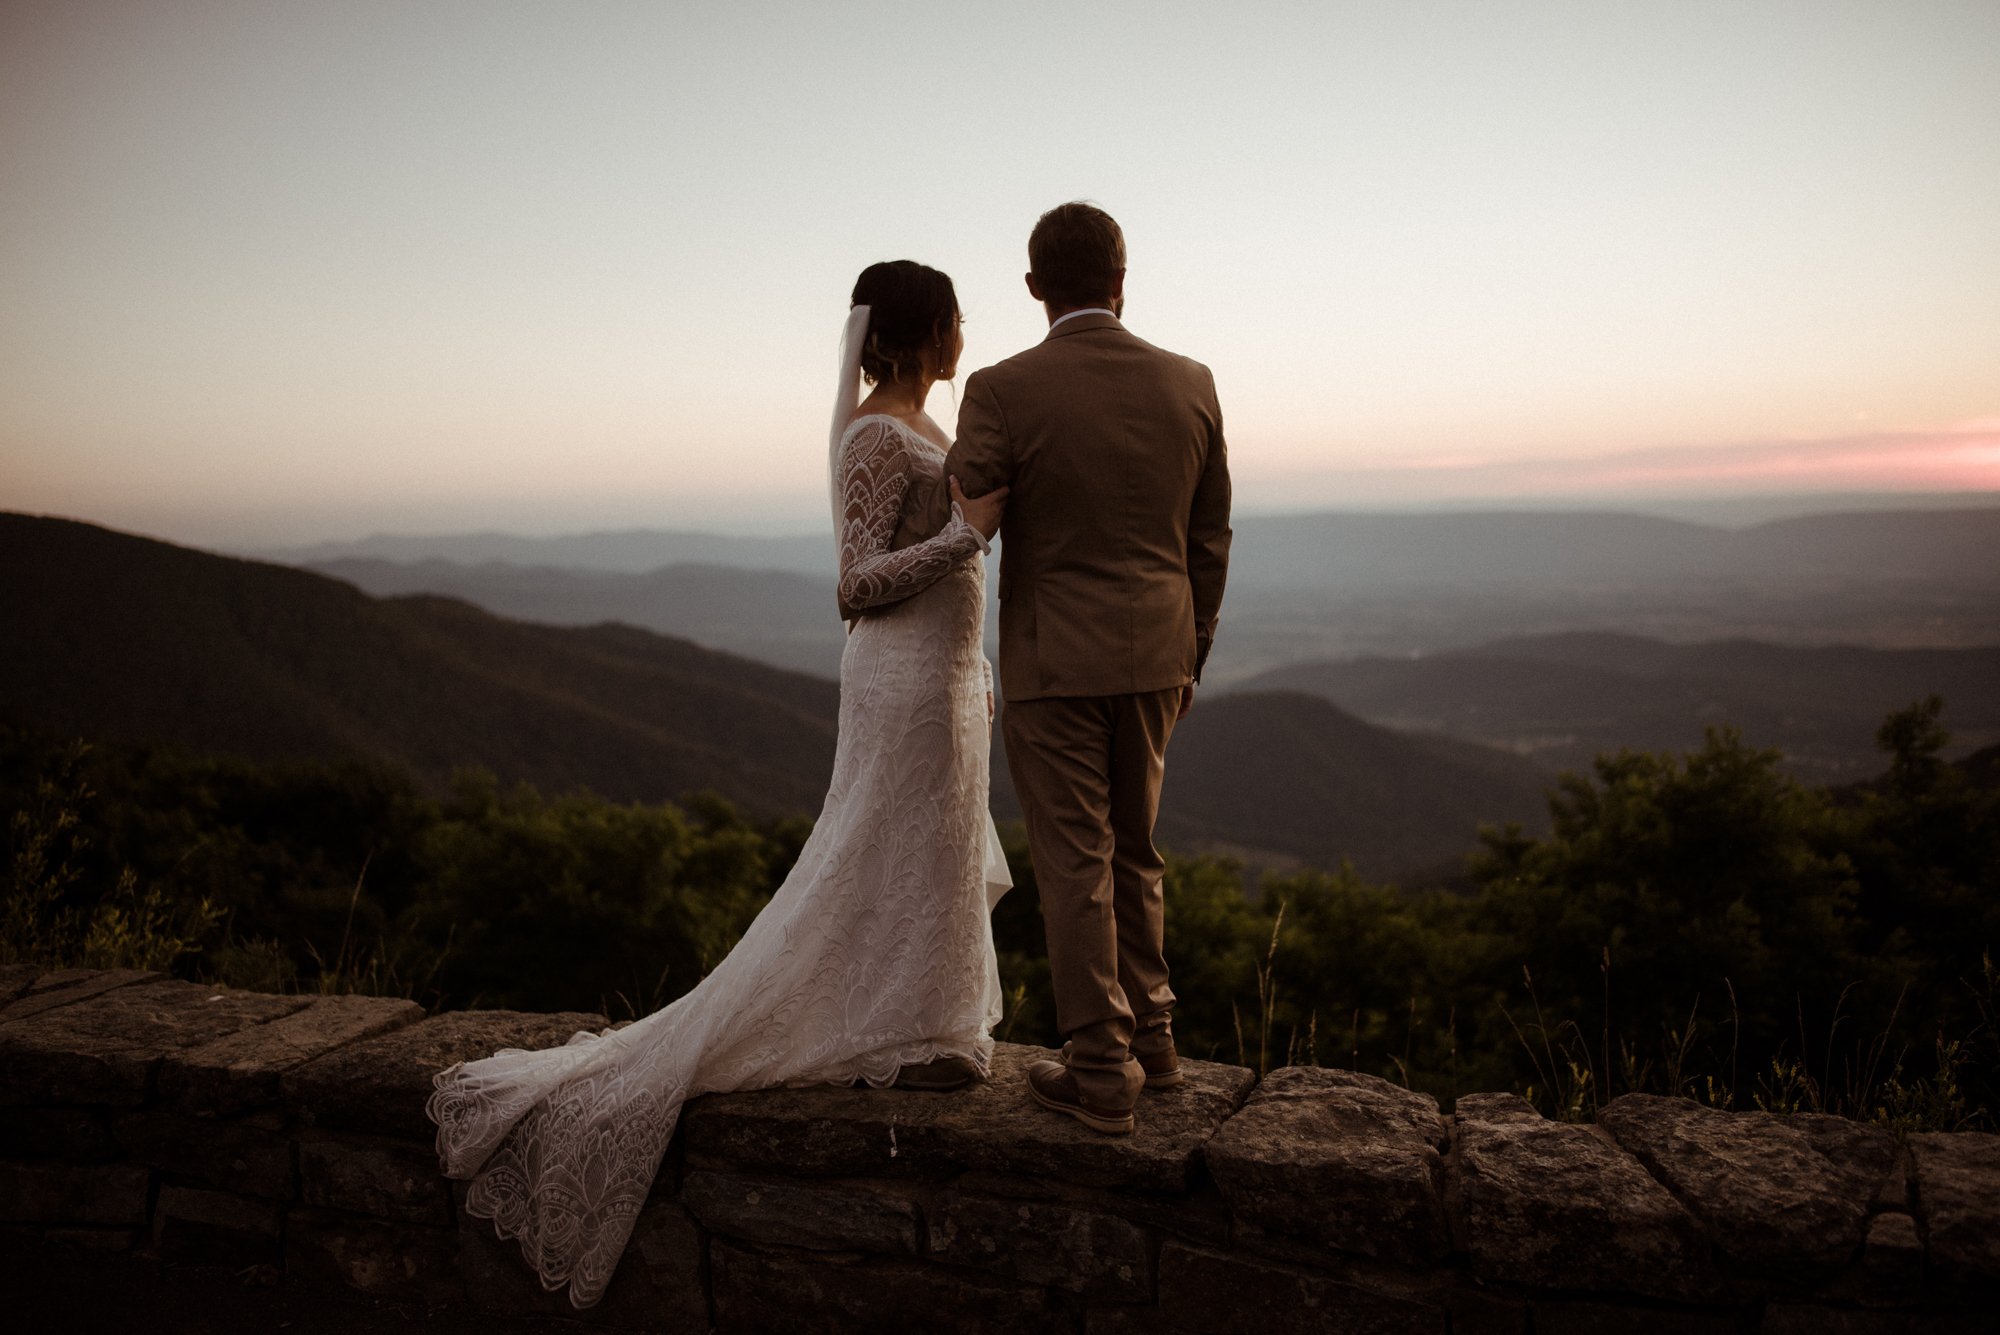 Sunset Elopement on Stony Man Summit in Shenandoah National Park - White Sails Creative Elopement Photography - July Elopement on the Blue Ridge Parkway_74.jpg